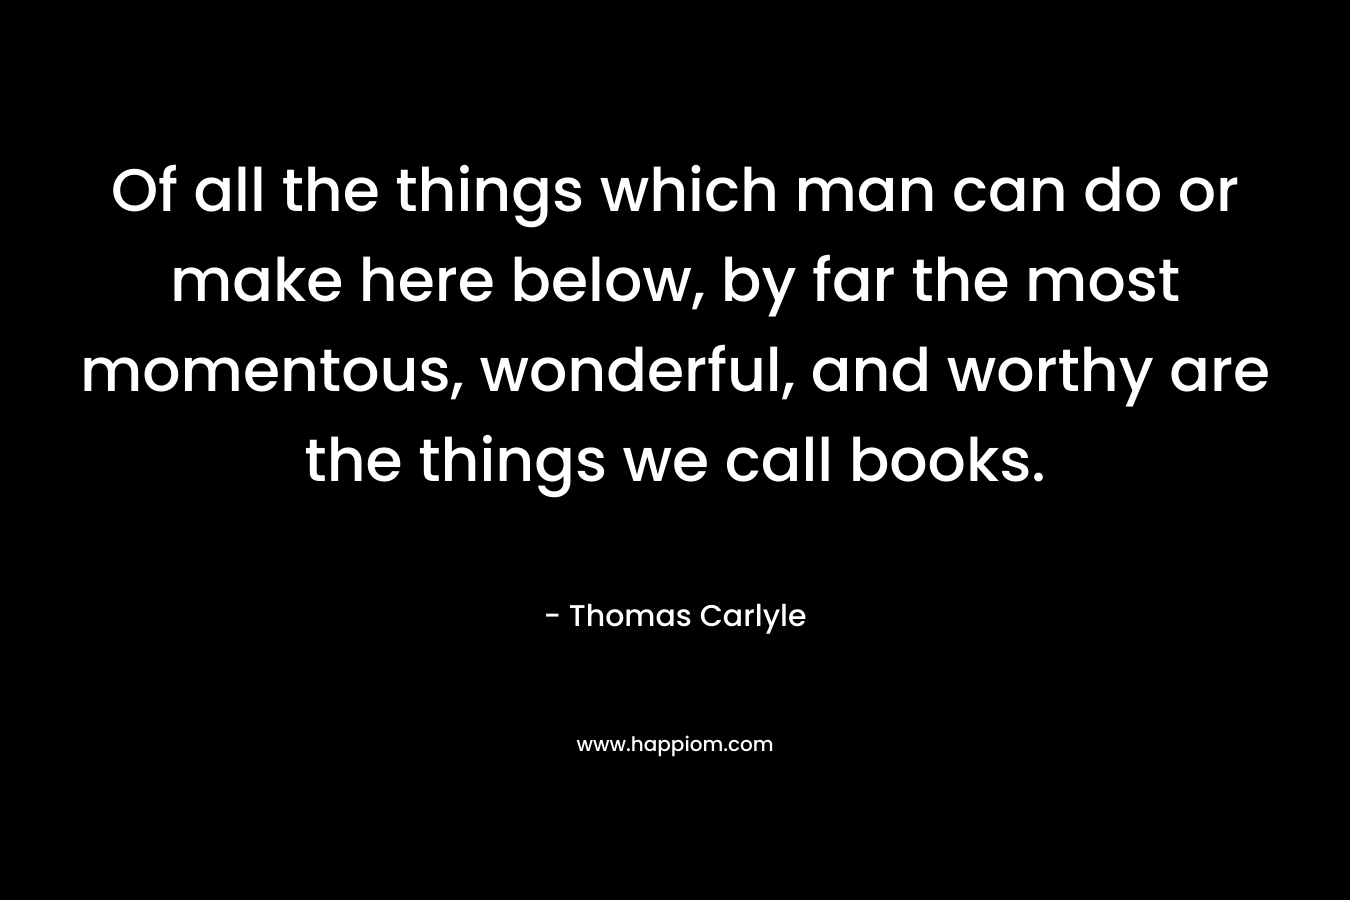 Of all the things which man can do or make here below, by far the most momentous, wonderful, and worthy are the things we call books. – Thomas Carlyle